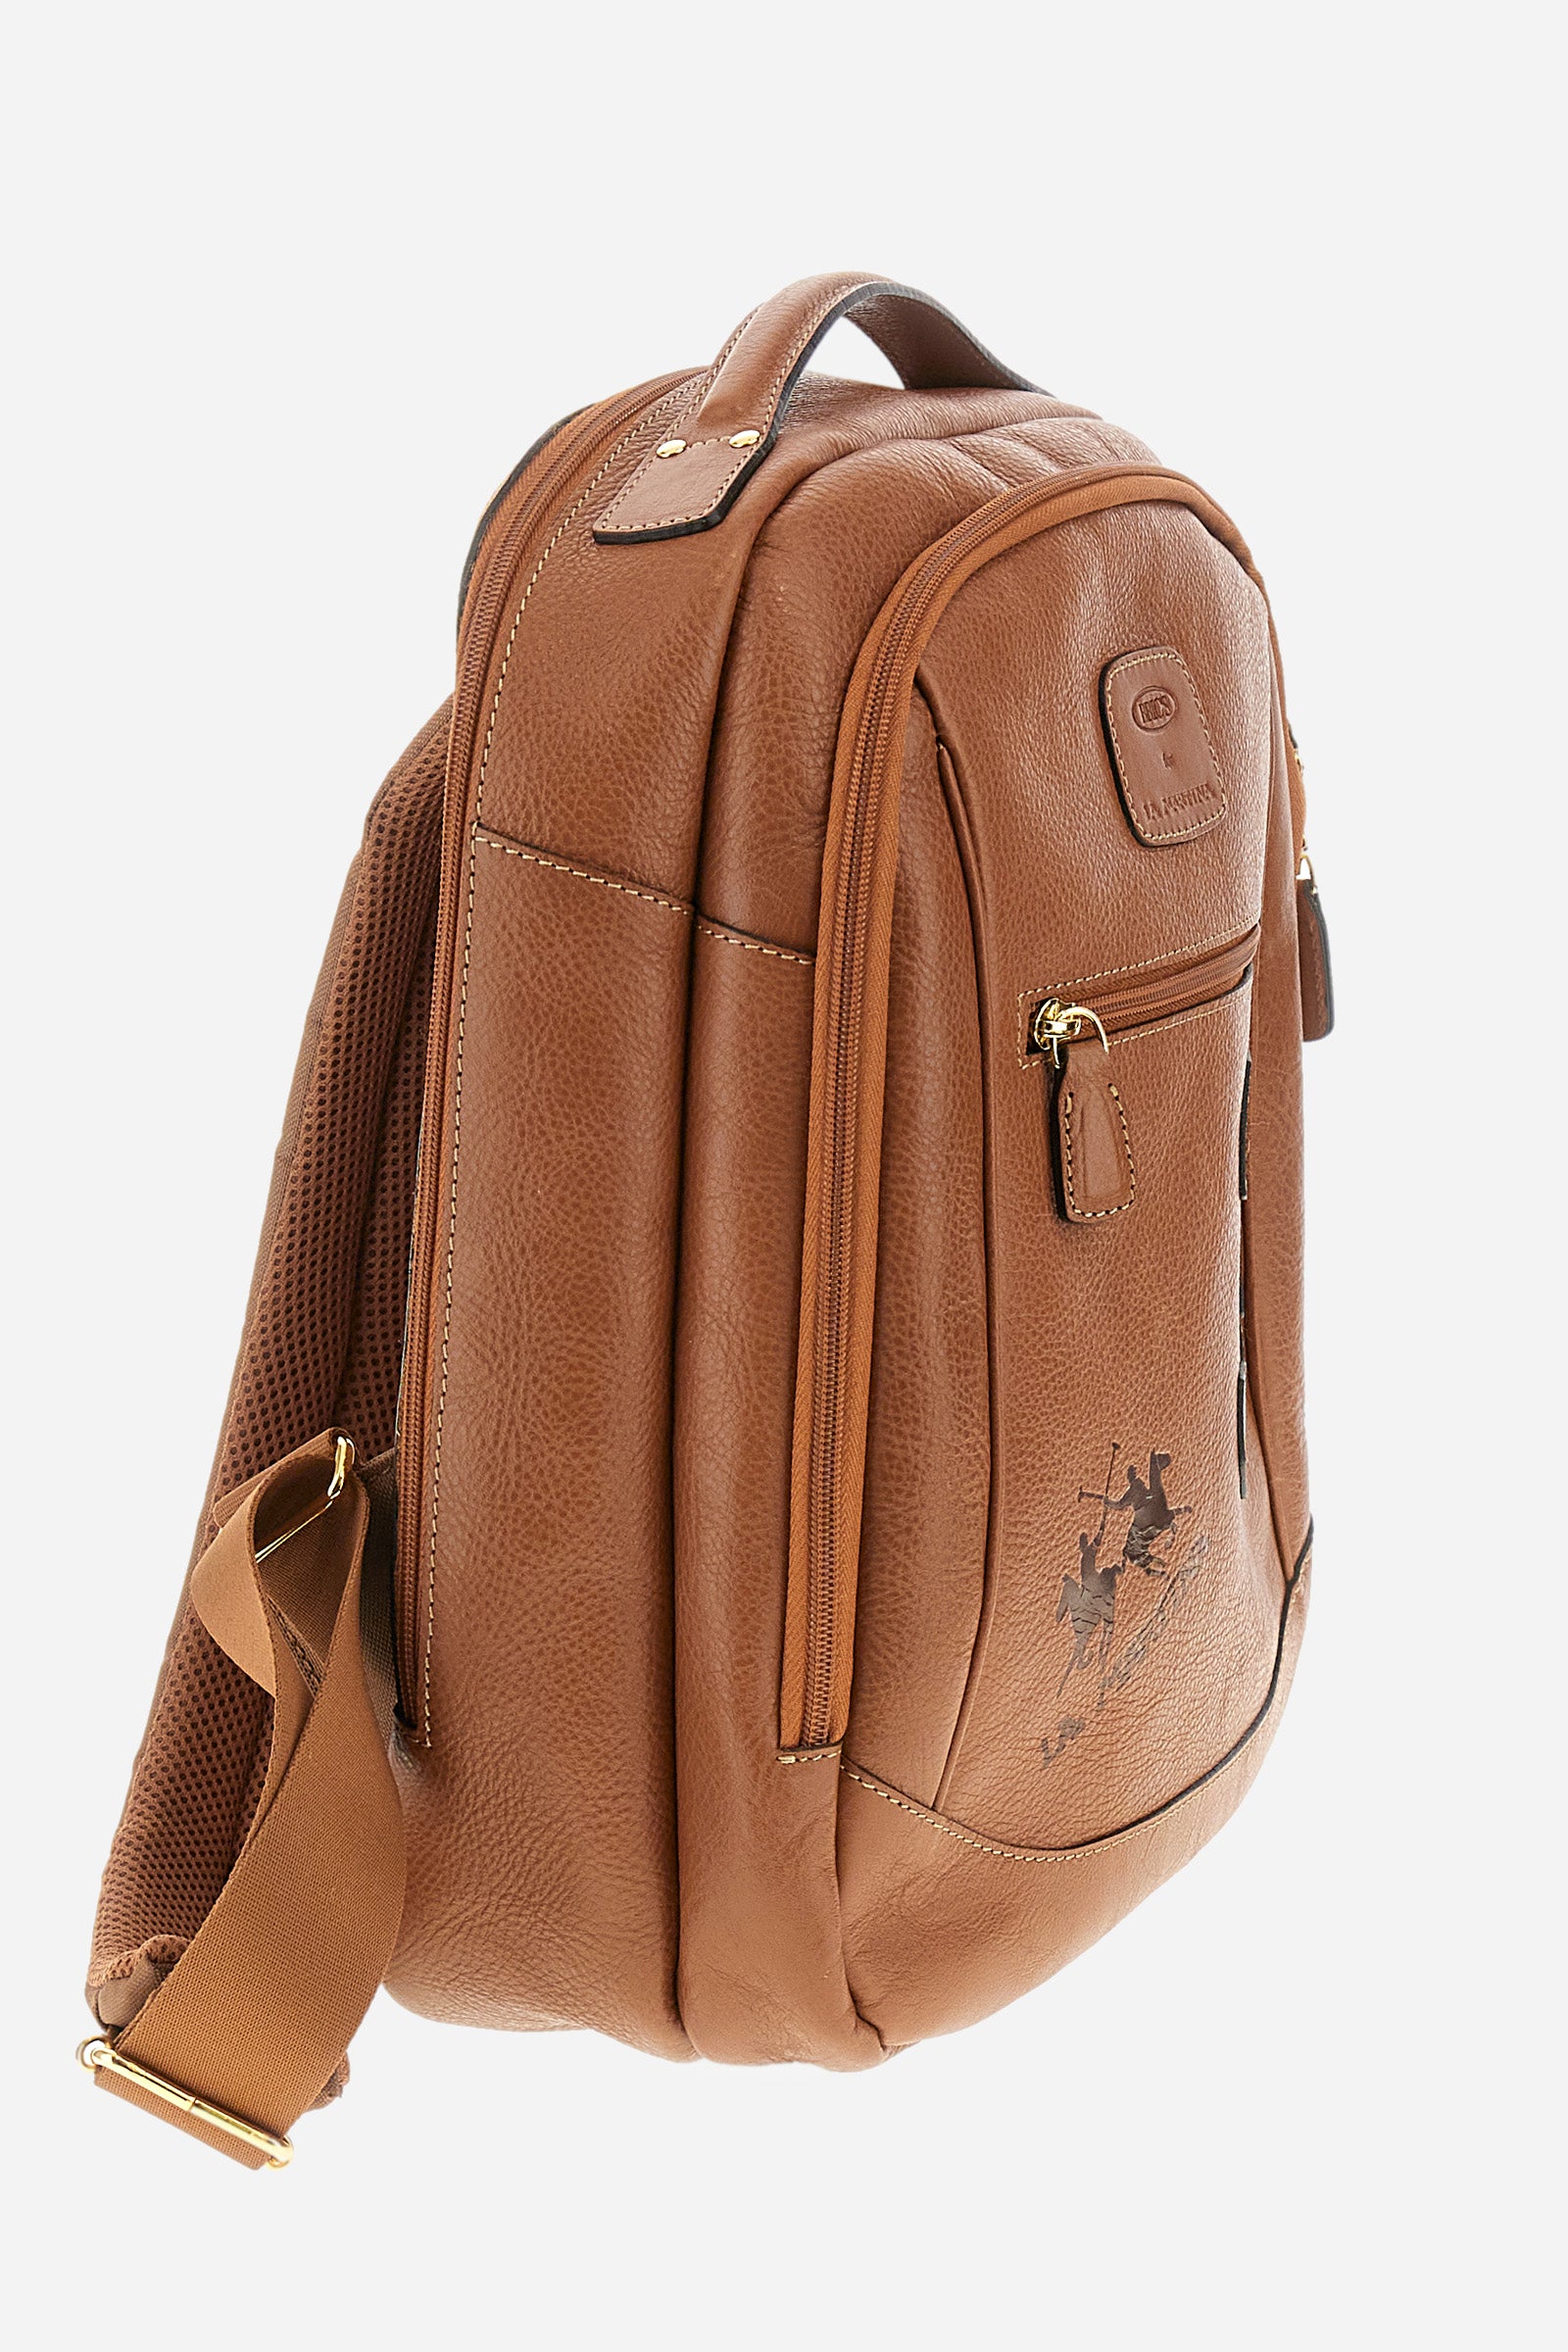 Unisex vegetable leather backpack - Bric's